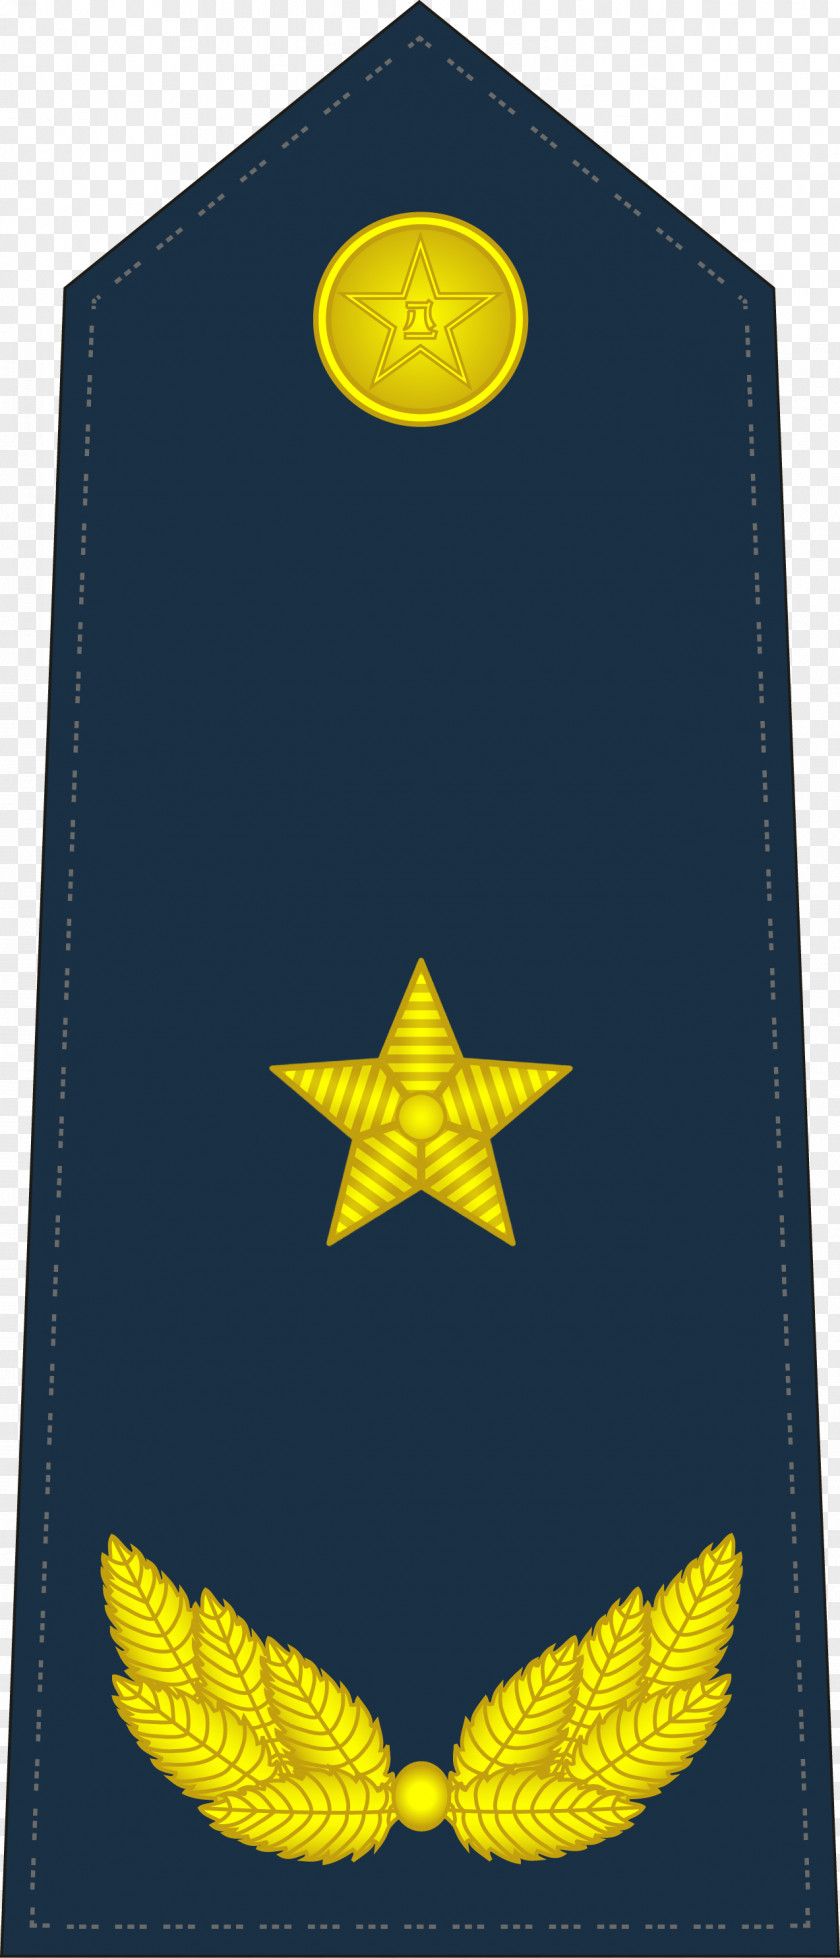 China People's Liberation Army Navy Air Force Military Rank PNG